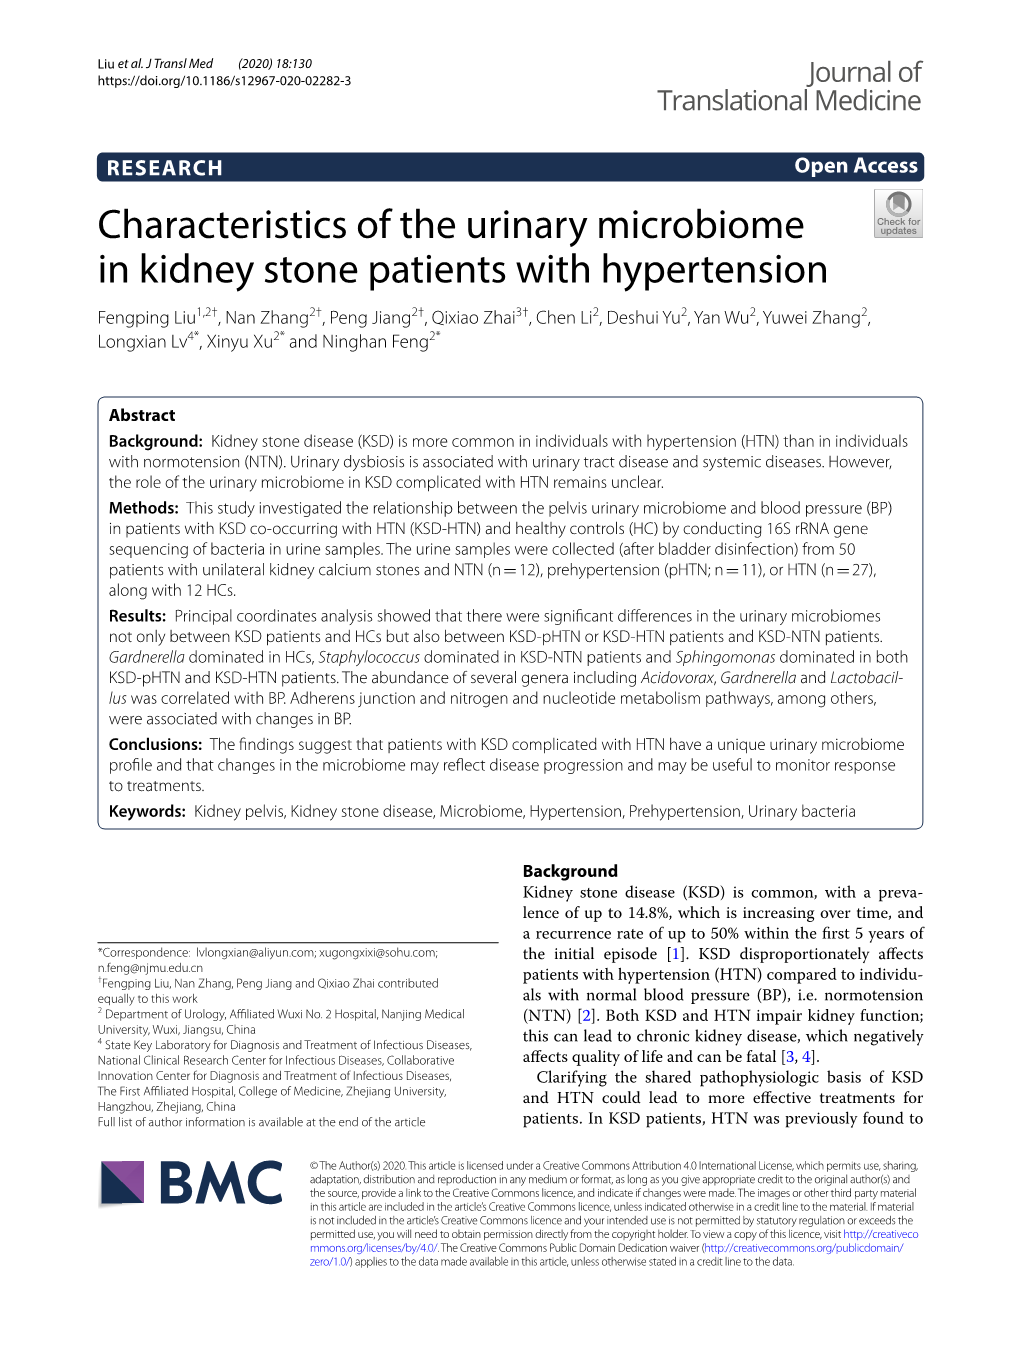 Characteristics of the Urinary Microbiome in Kidney Stone Patients